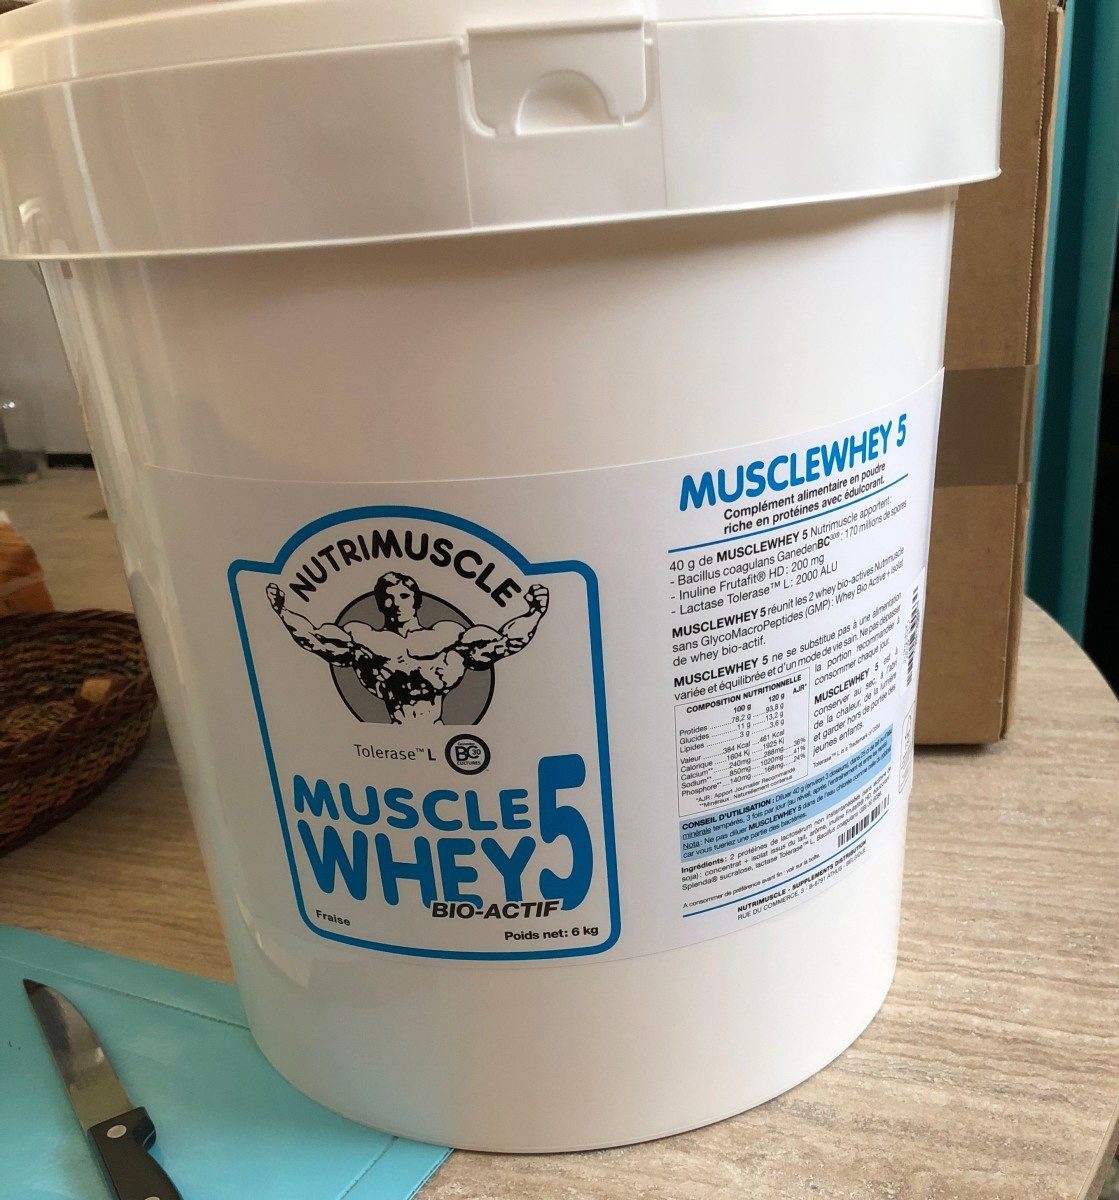 Muscle whey 5 bio active - Product - fr